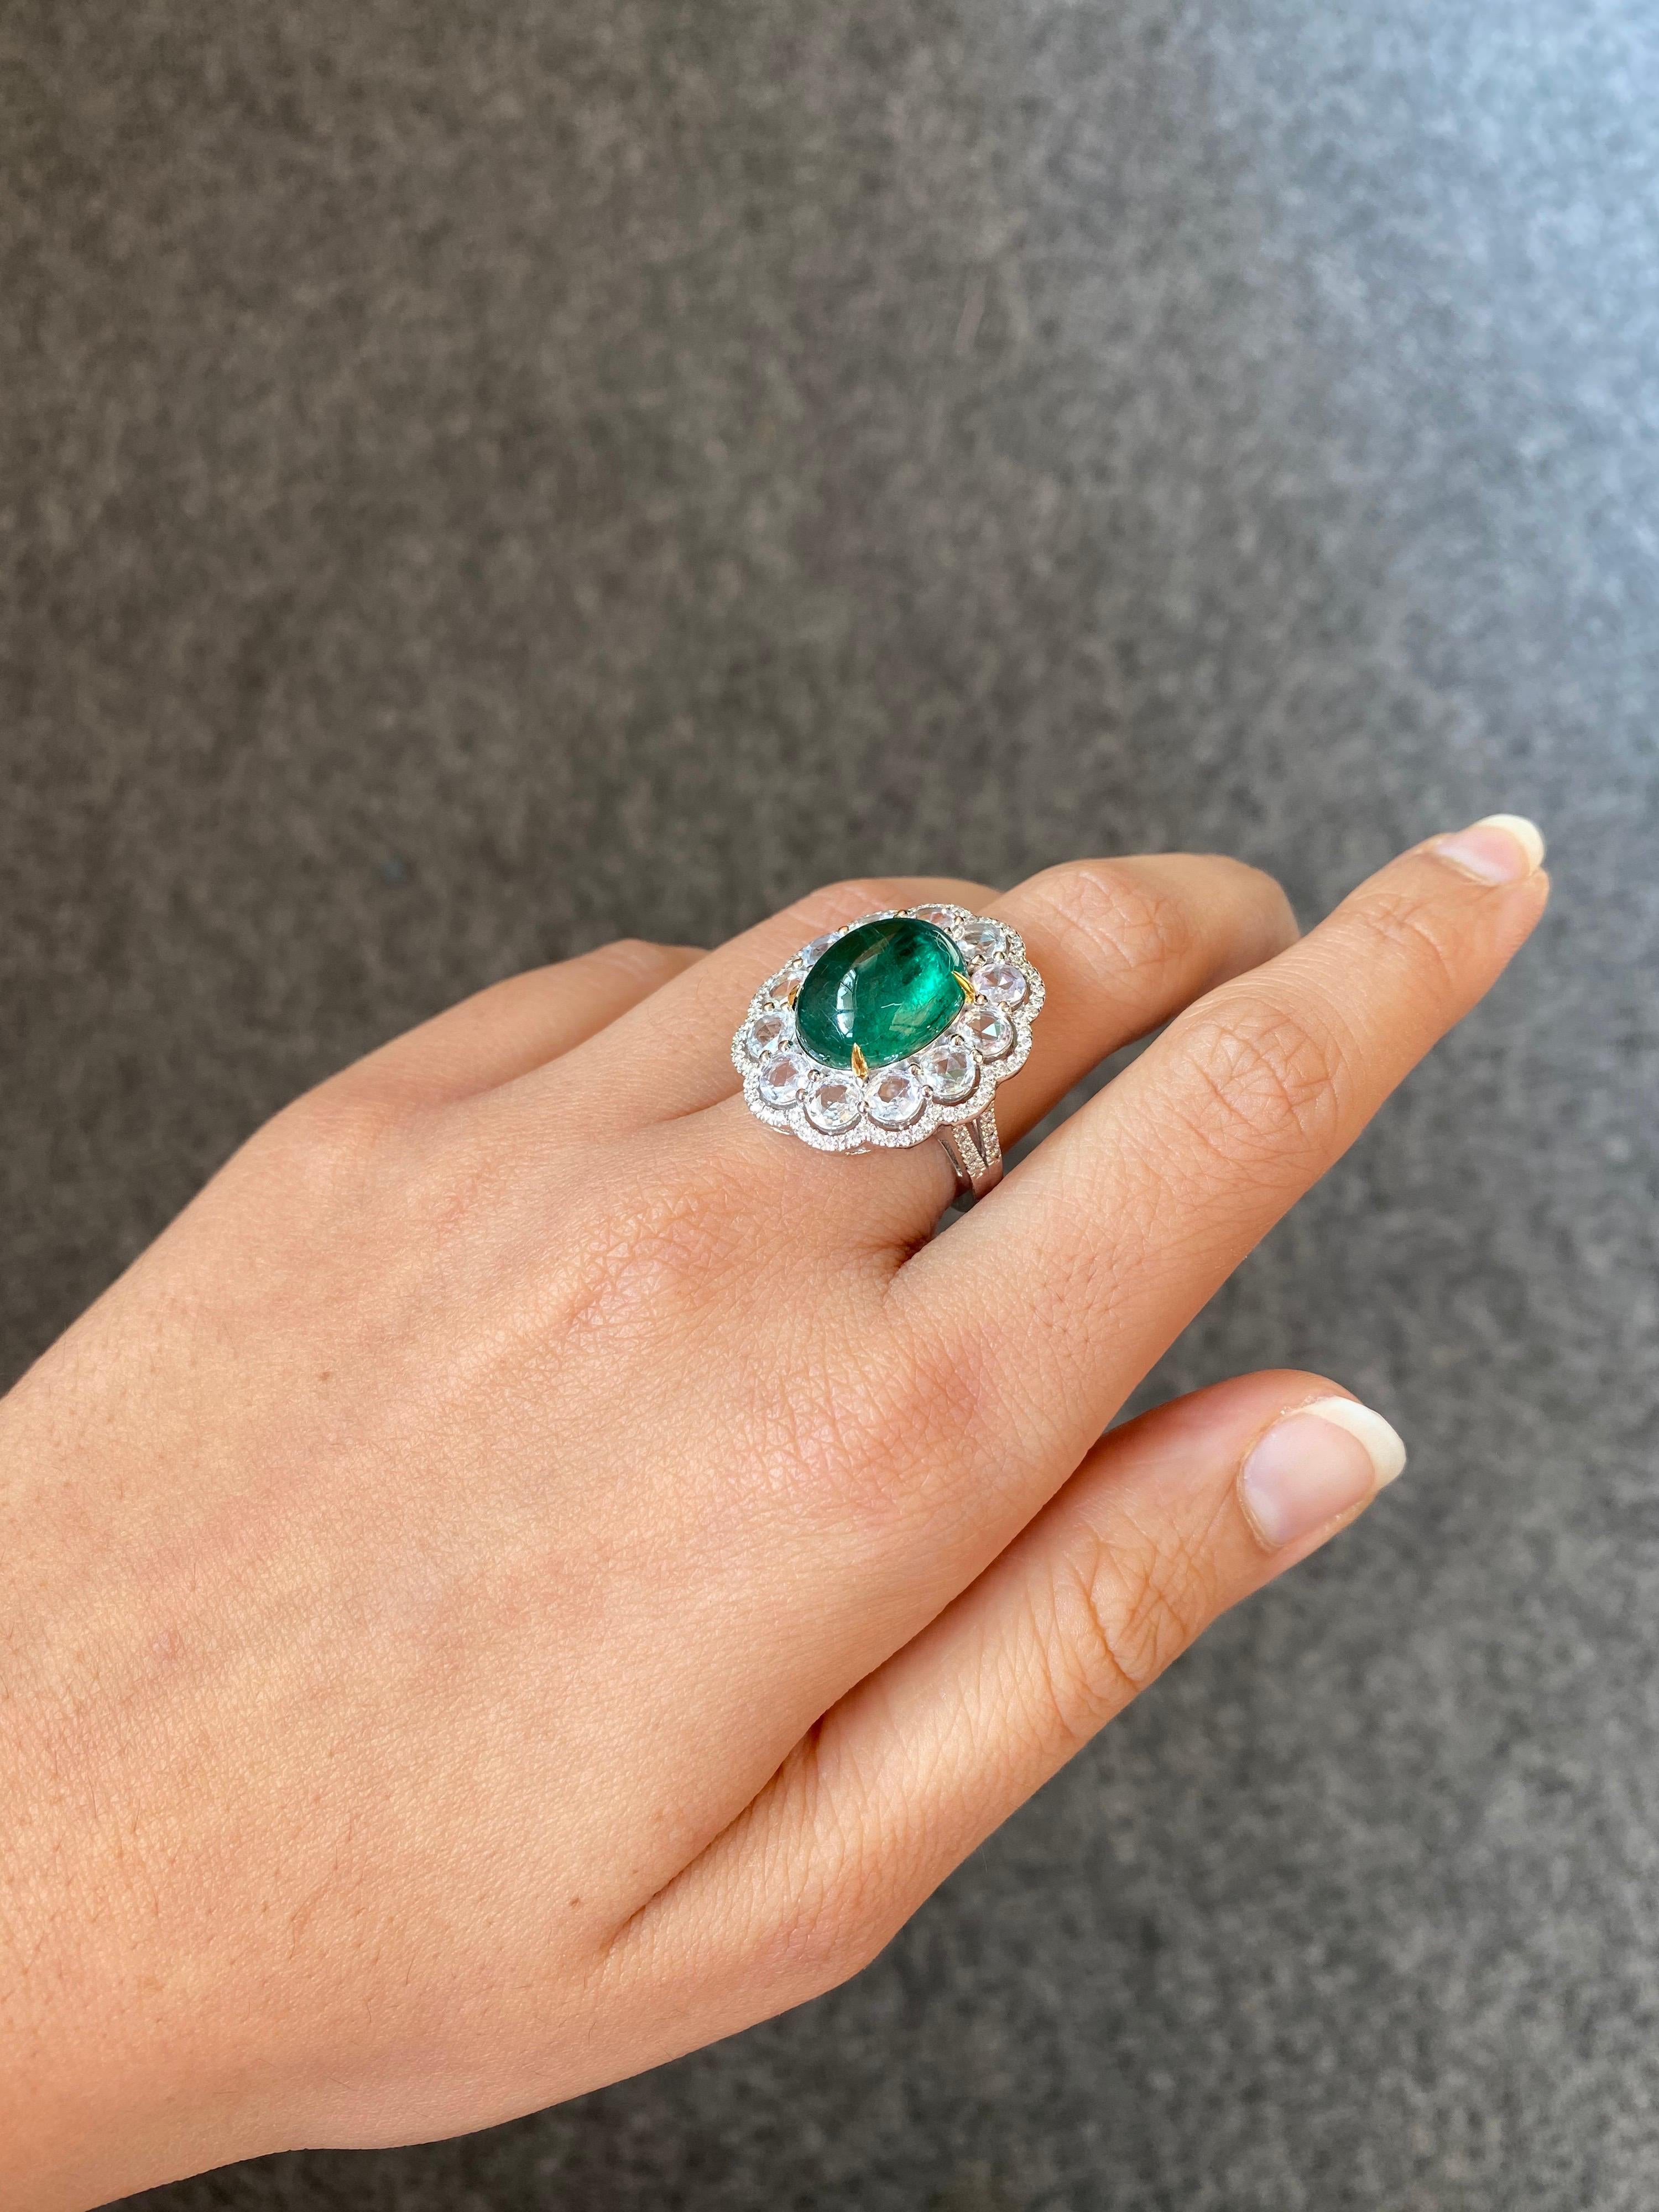 Make a statement when you wear this gorgeous 18K White Gold, natural Emerald and Diamond cocktail engagement ring. The centre stone is an oval cabochon Zambian Emerald of top quality.  It is completely transparent and there is an immense amount of